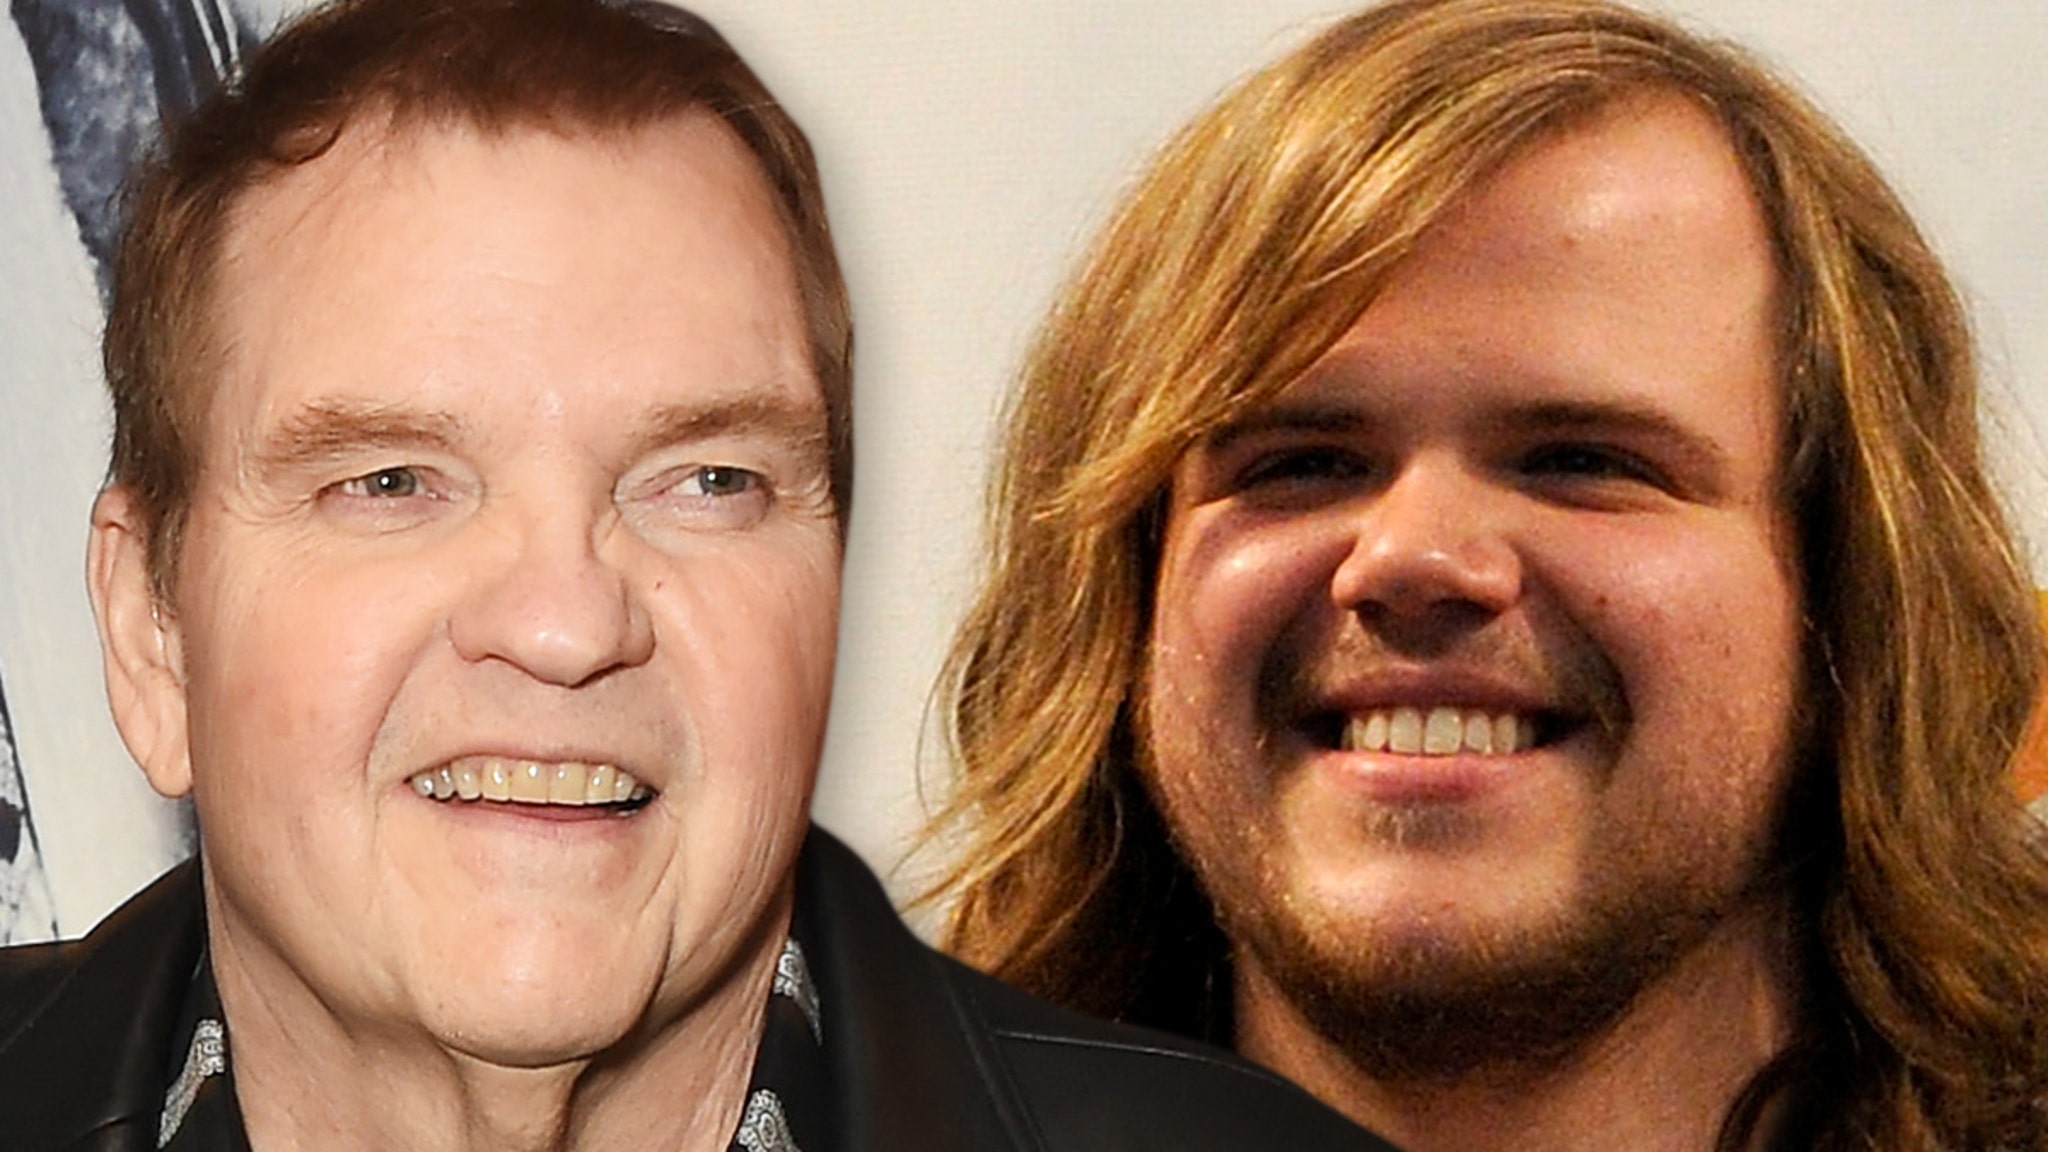 Meat Loaf Would Want His Band to Keep Touring Says 'Idol's Caleb Johnson - TMZ